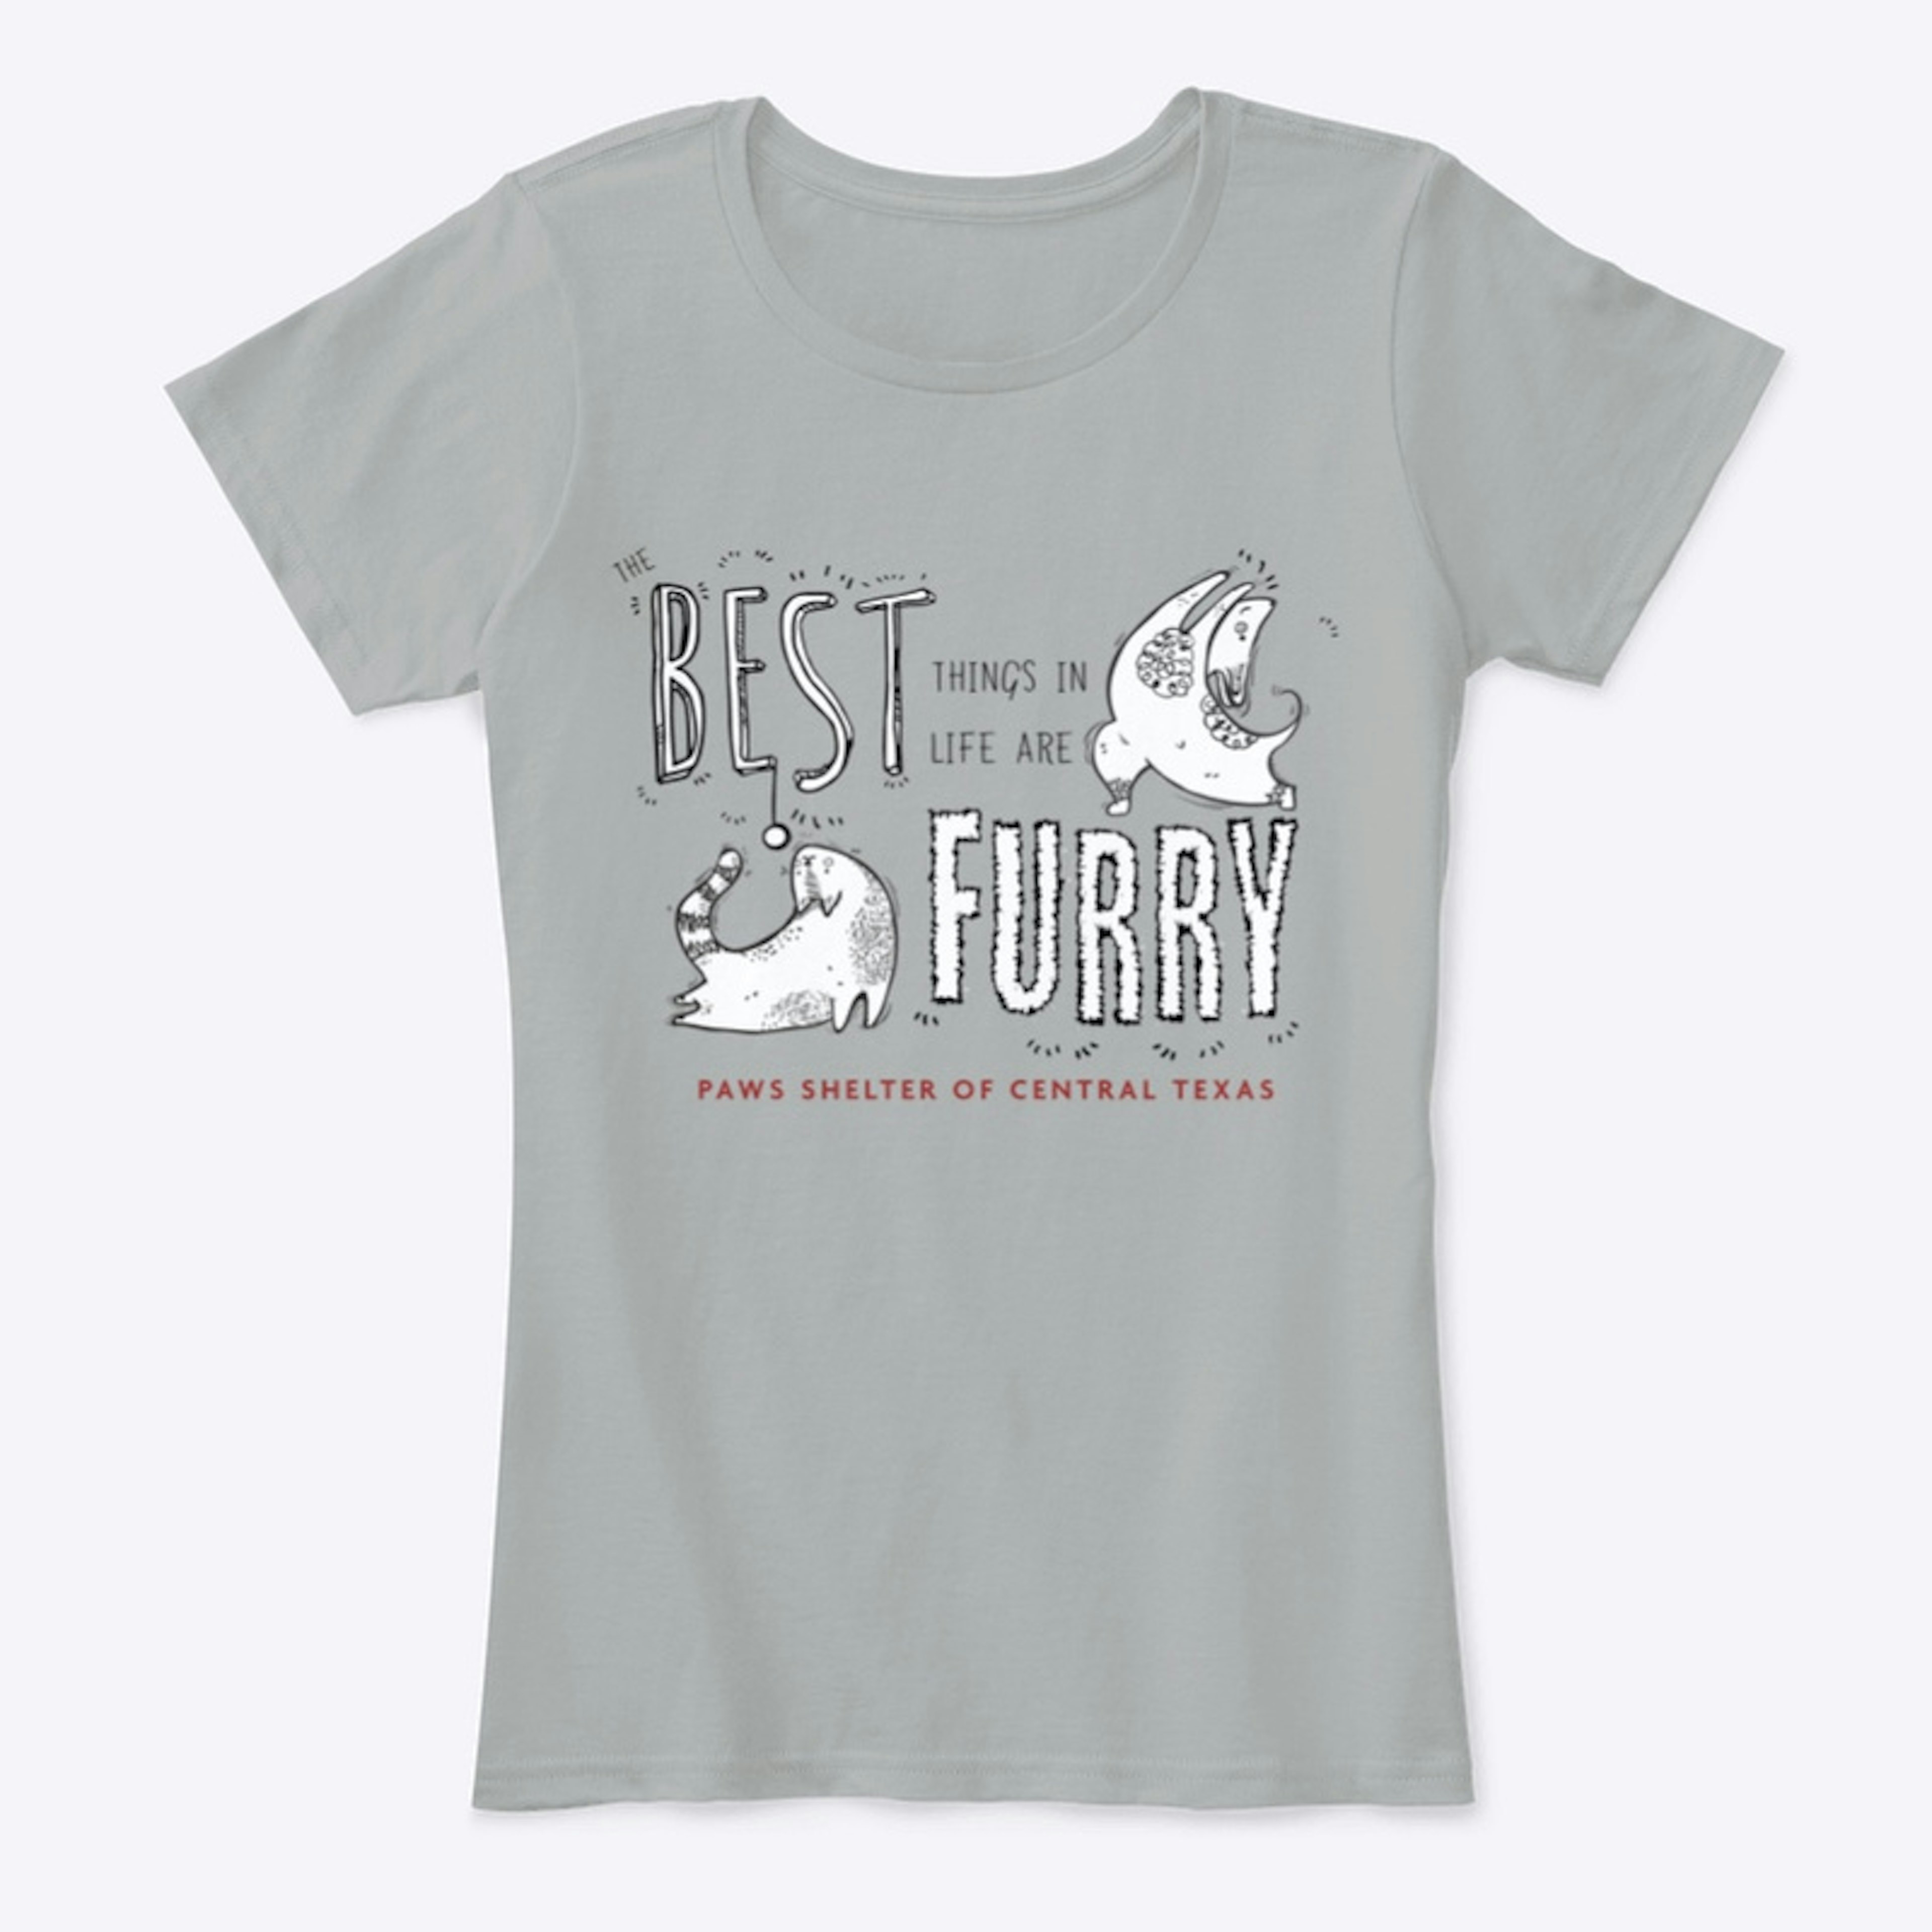 The Best Things in Life Are Furry